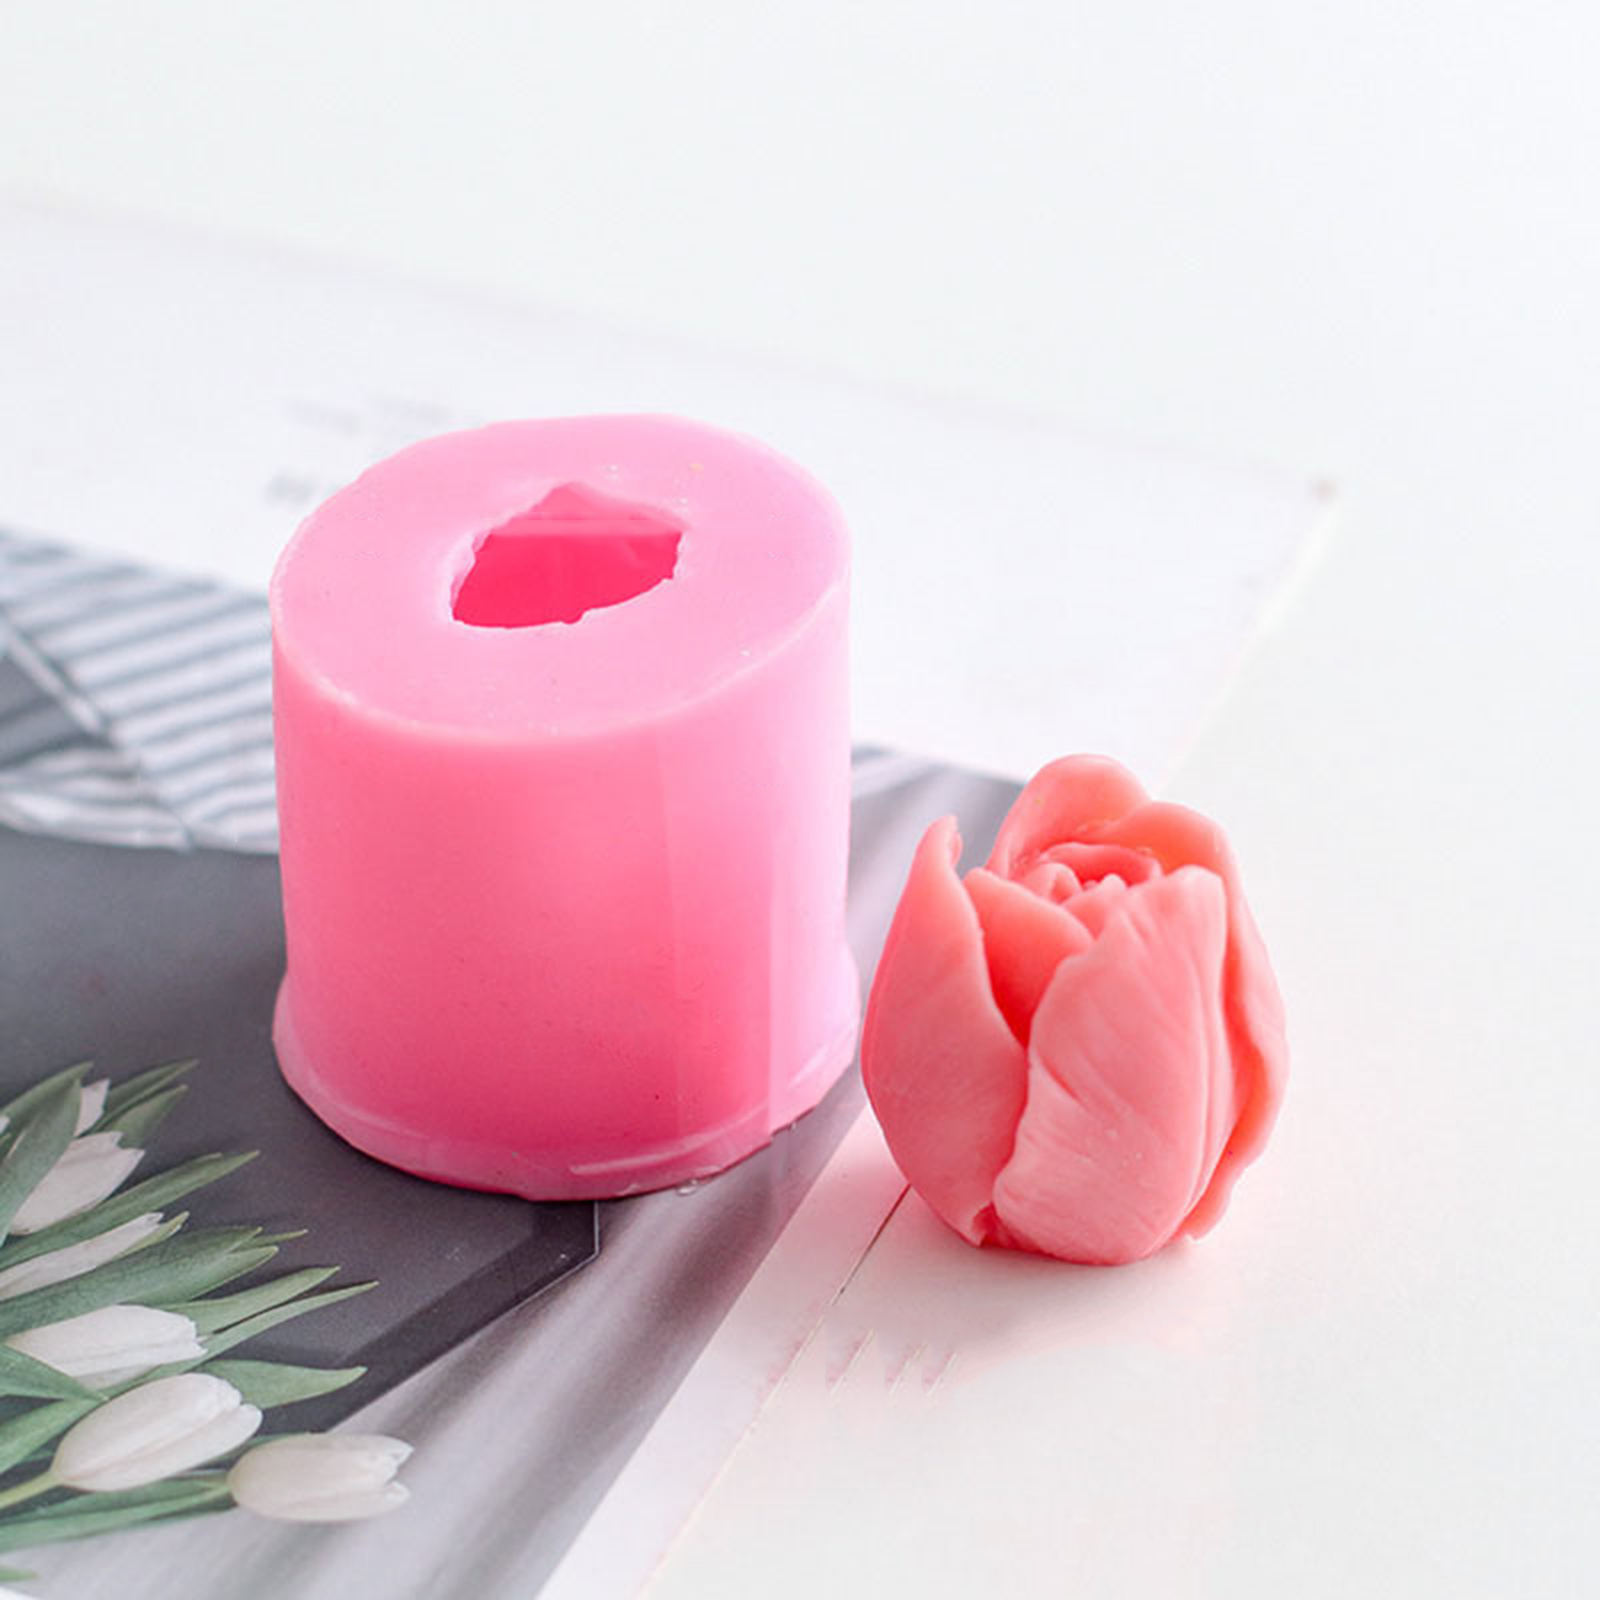 Picture of Silicone Resin Mold For Jewelry Making Handmade soap Tulip Flower Pink 5.5cm x 4.5cm, 1 Piece